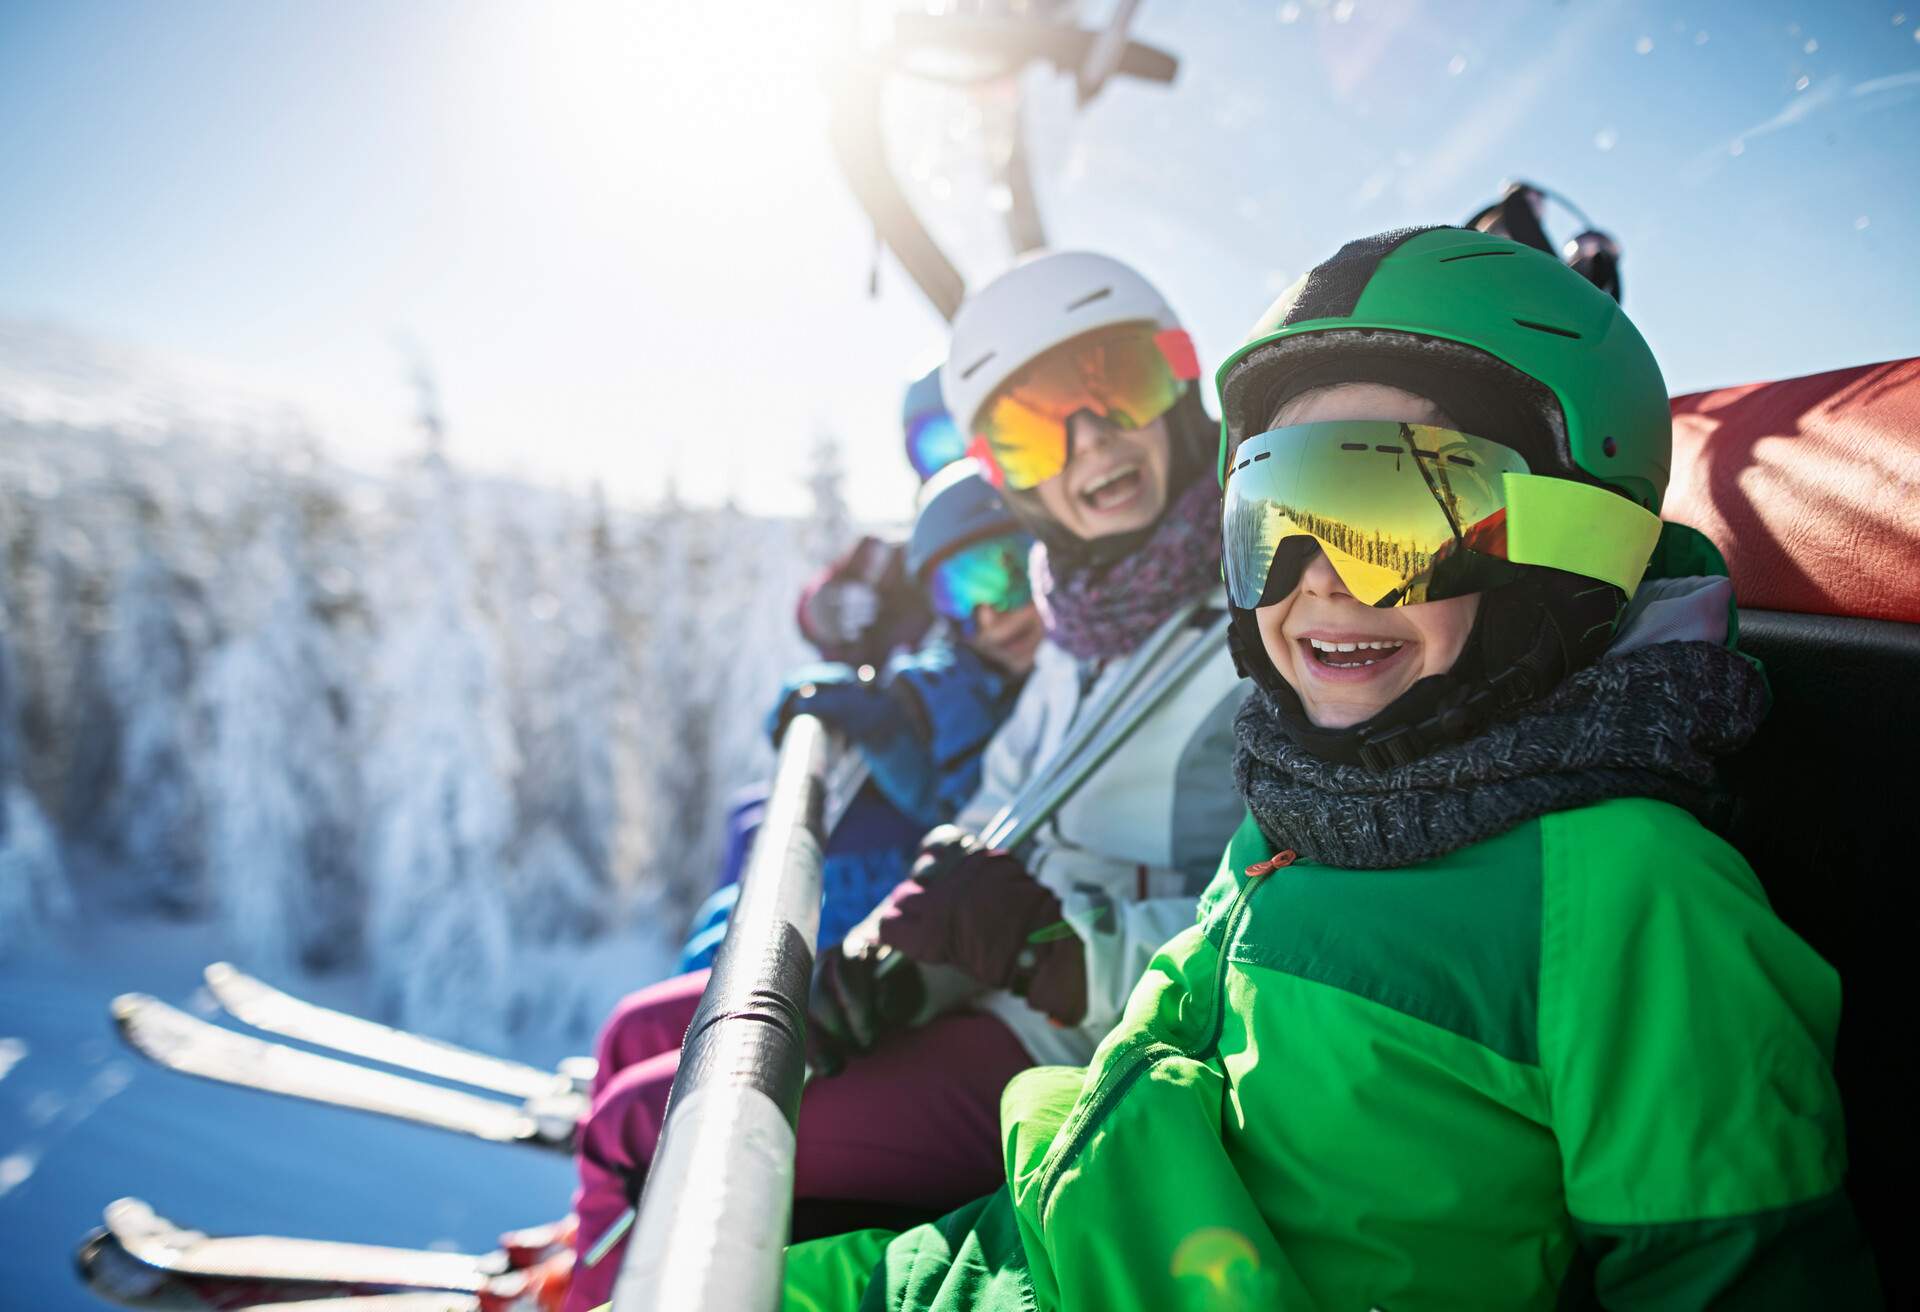 A smiling mother and kids in ski outfit sitting on a chairlift.